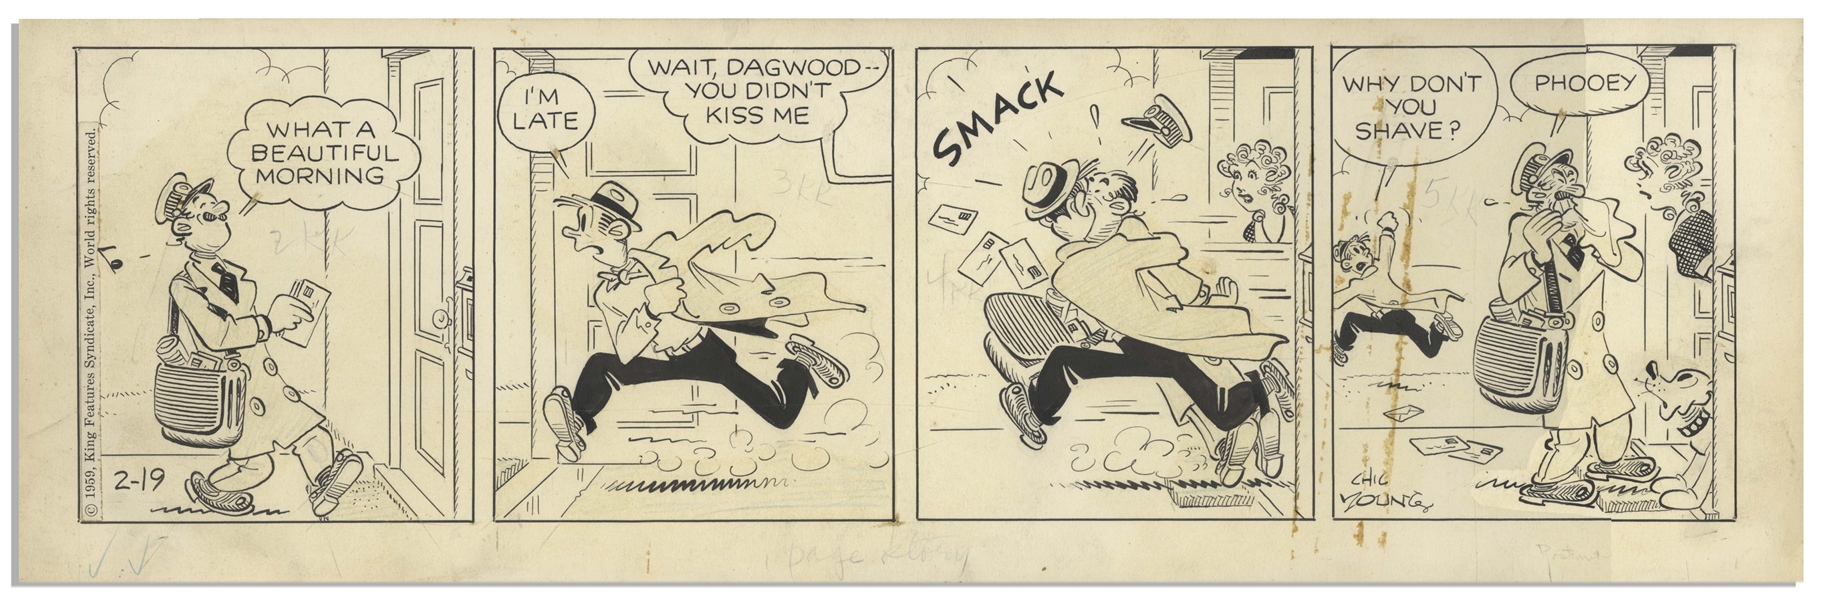 Chic Young Hand-Drawn ''Blondie'' Comic Strip From 1959 Titled ''Delivered by Mistake!'' -- Dagwood Kisses the Mailman on the Rush Out the Door